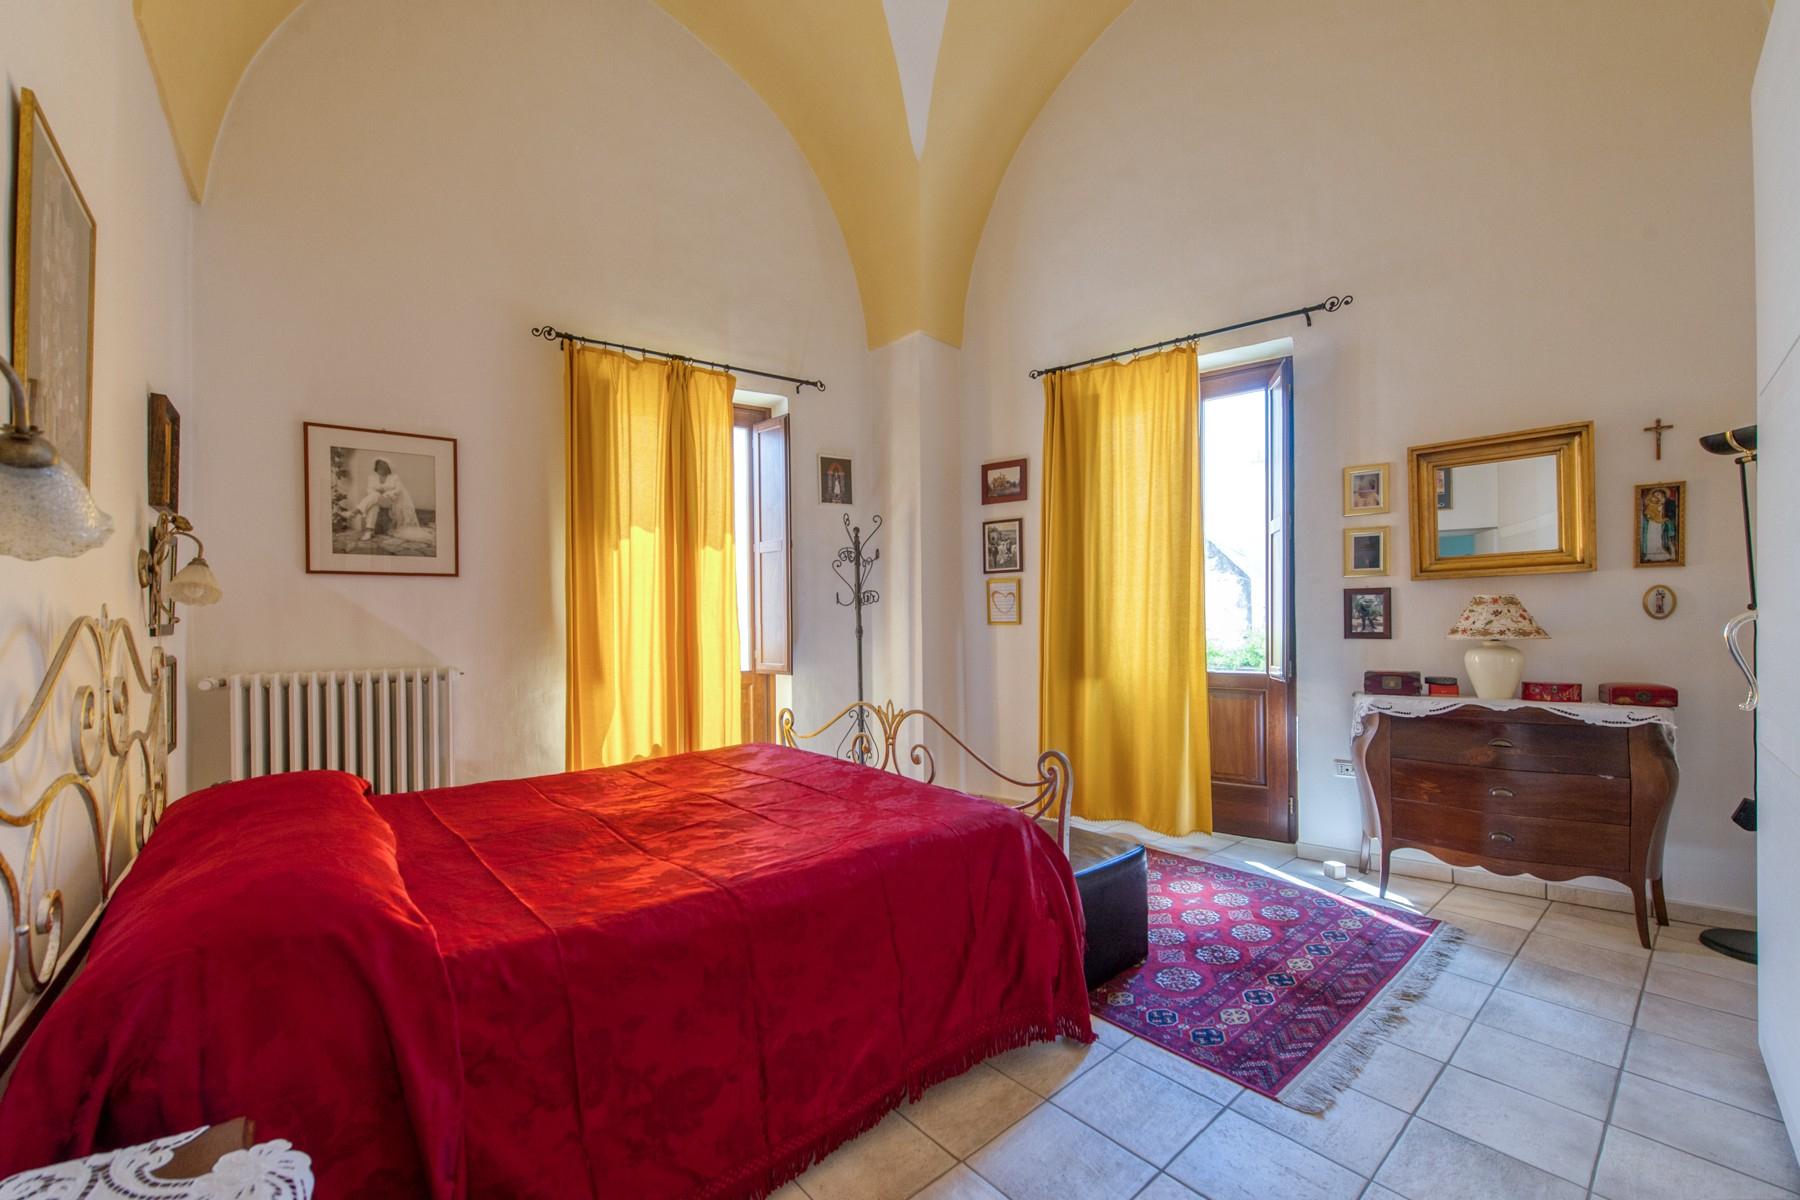 Perfectly renovated Palazzetto in the historic center of Parabita - 10